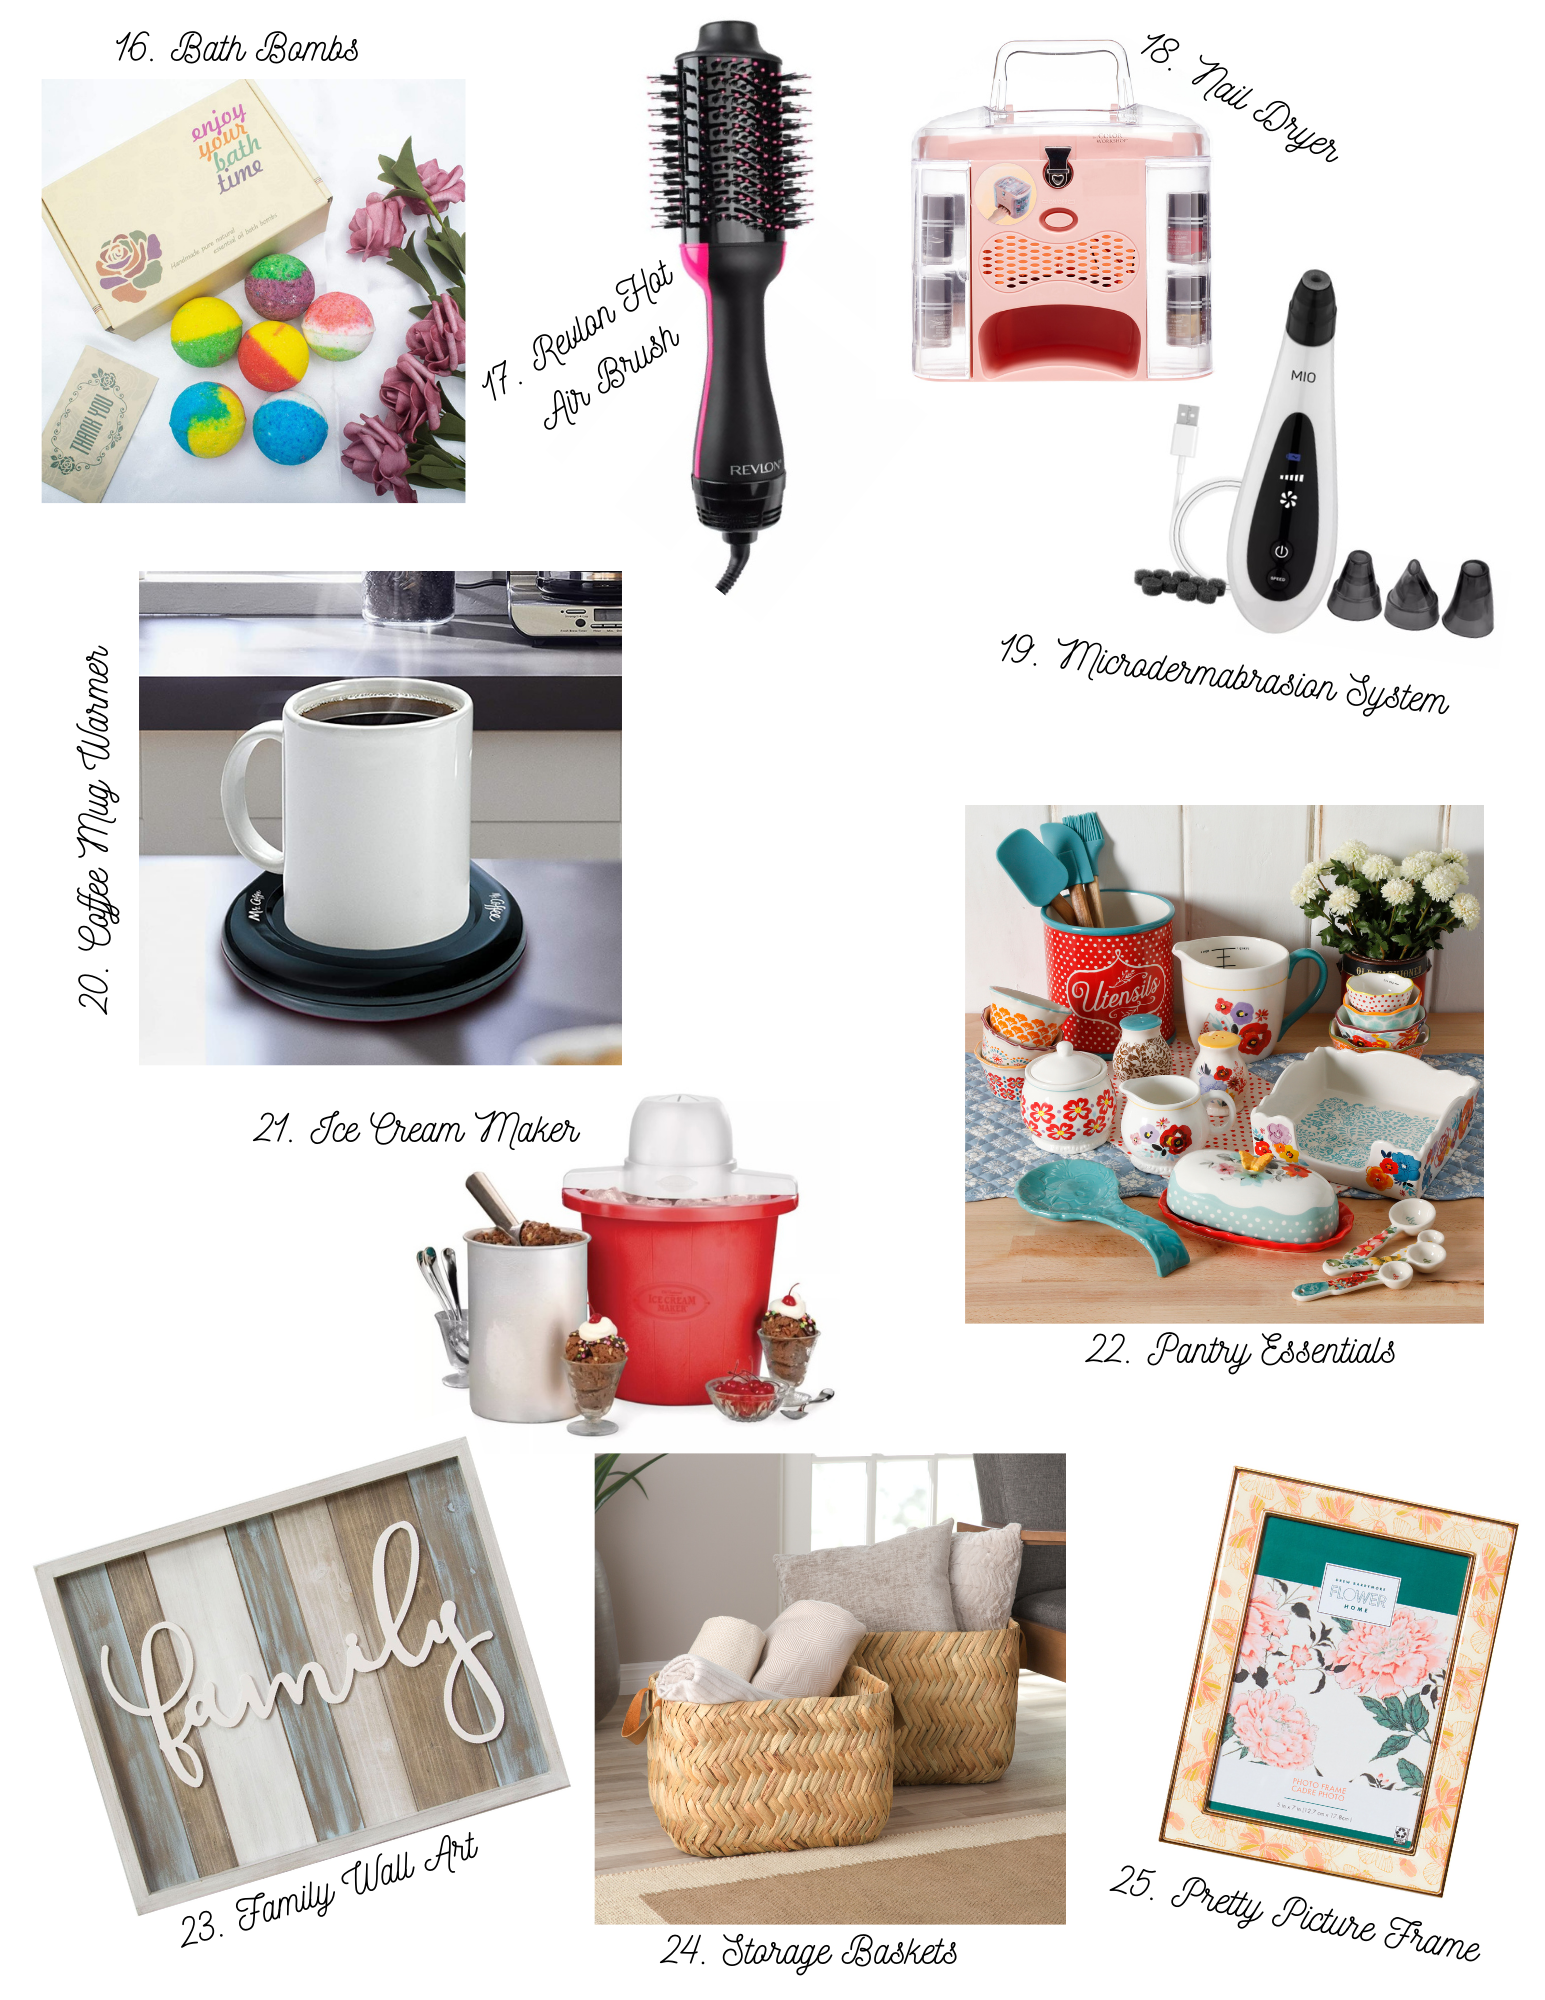 working mom gift guide